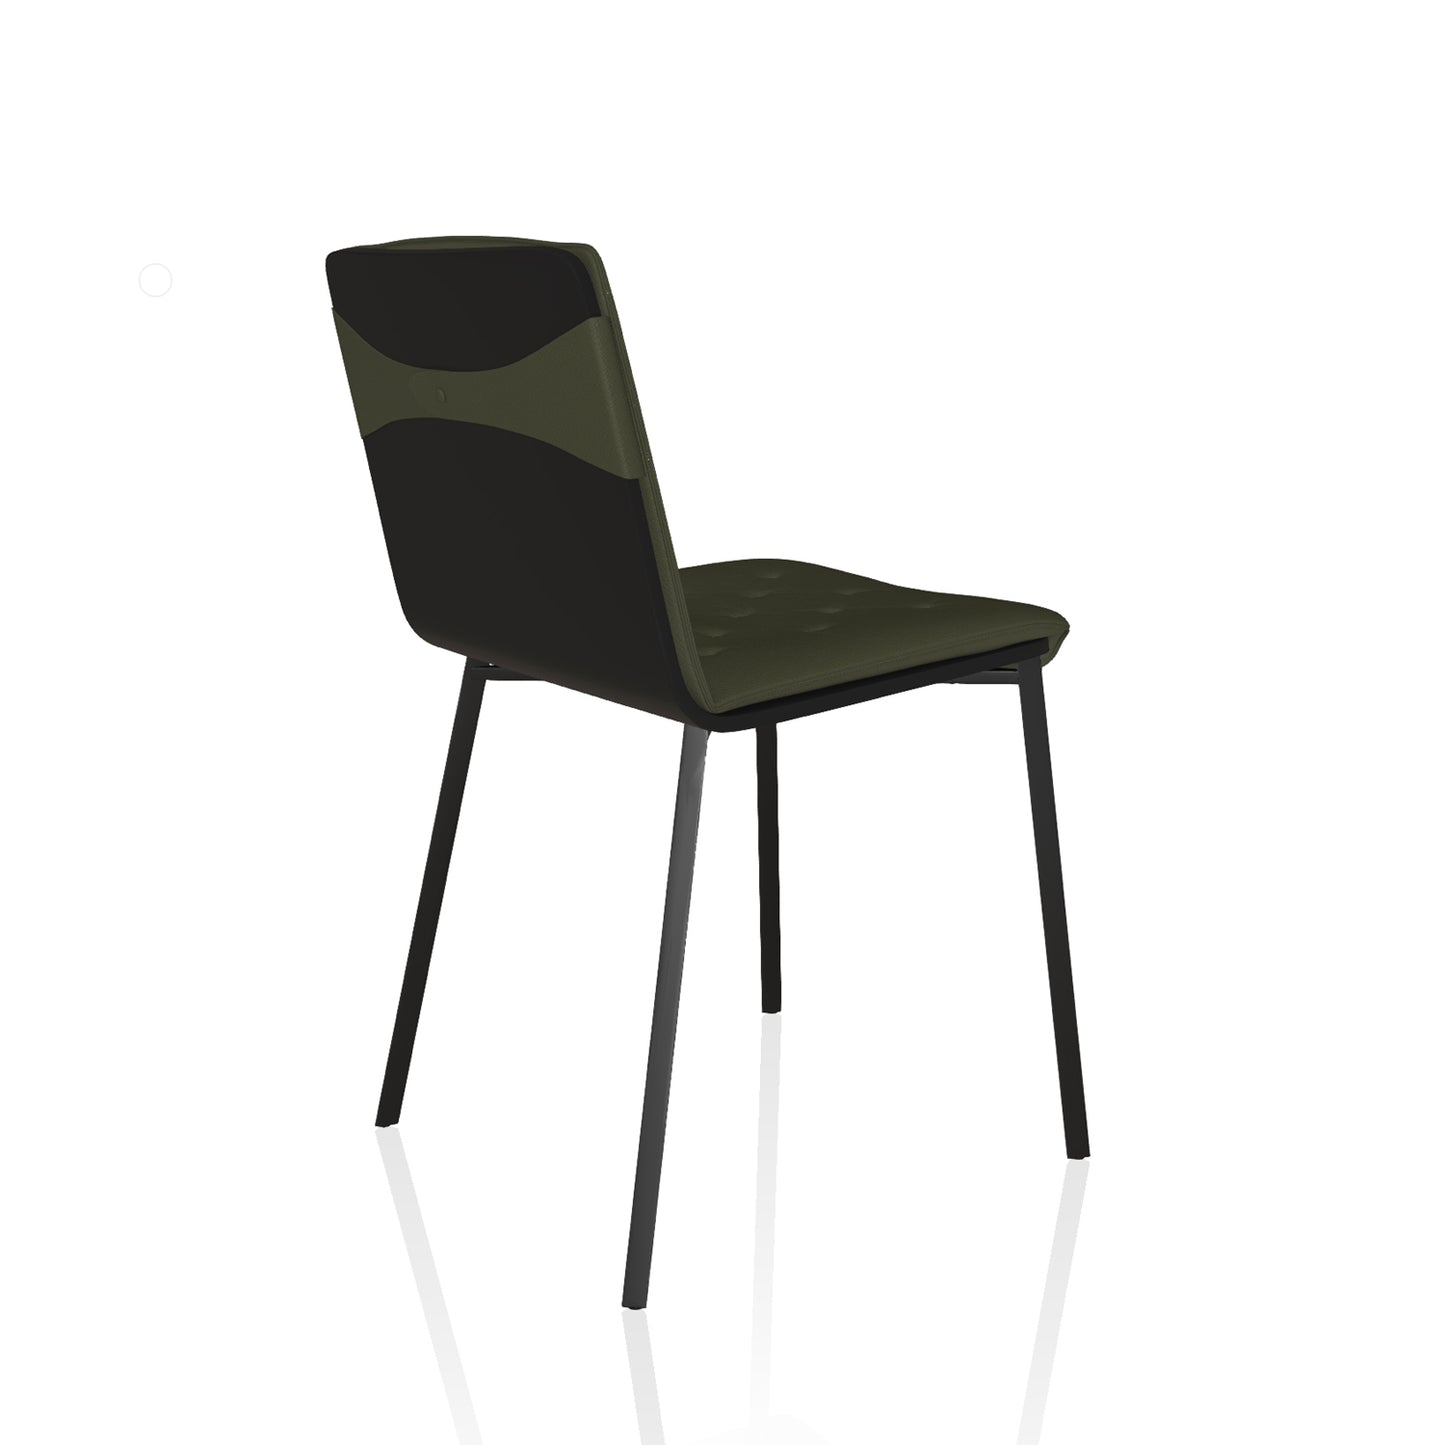 Dining Chair By Bontempi Casa - Black With Green Cushion